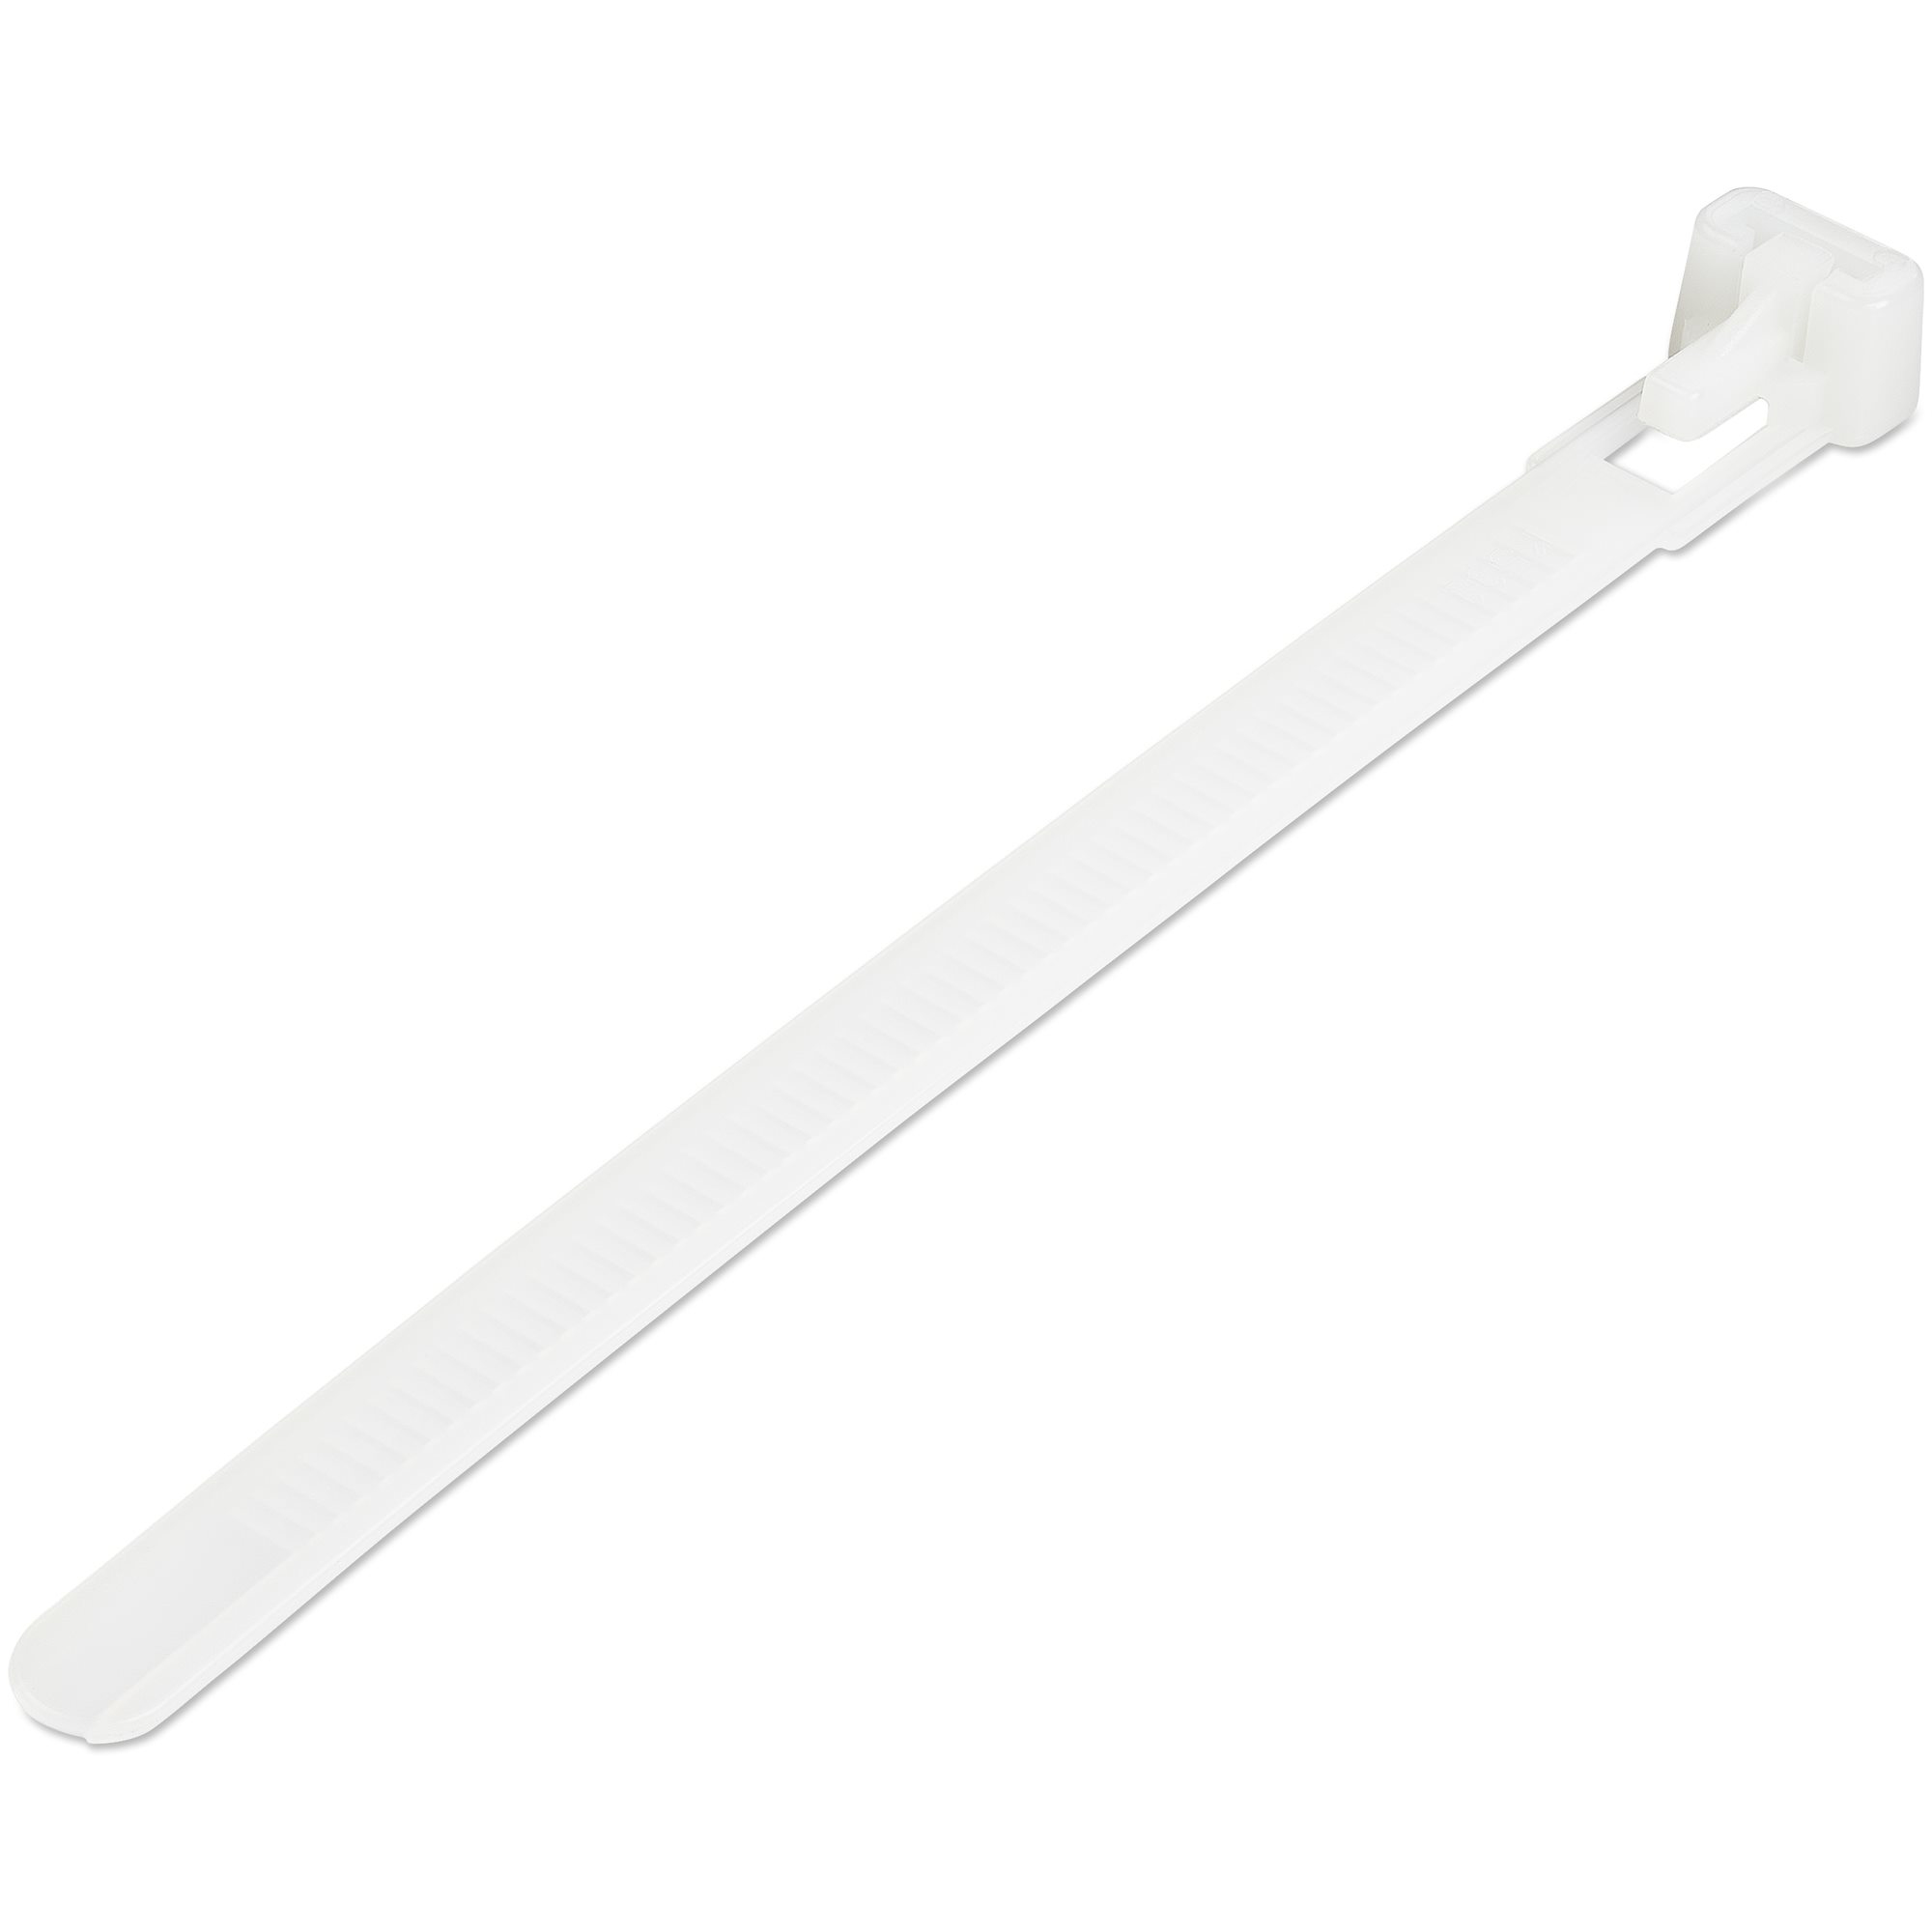 StarTech.com 12cm(5") Reusable Cable Ties, 7mm(1/4") wide, 30mm(1-1/8") Bundle Dia. 22kg(50lb) Tensile Strength, Releasable Nylon Ties, Indoor/Outdoor, 94V-2/UL Listed, 100 Pack, White - Nylon 66 Plastic - TAA (CBMZTRB5)